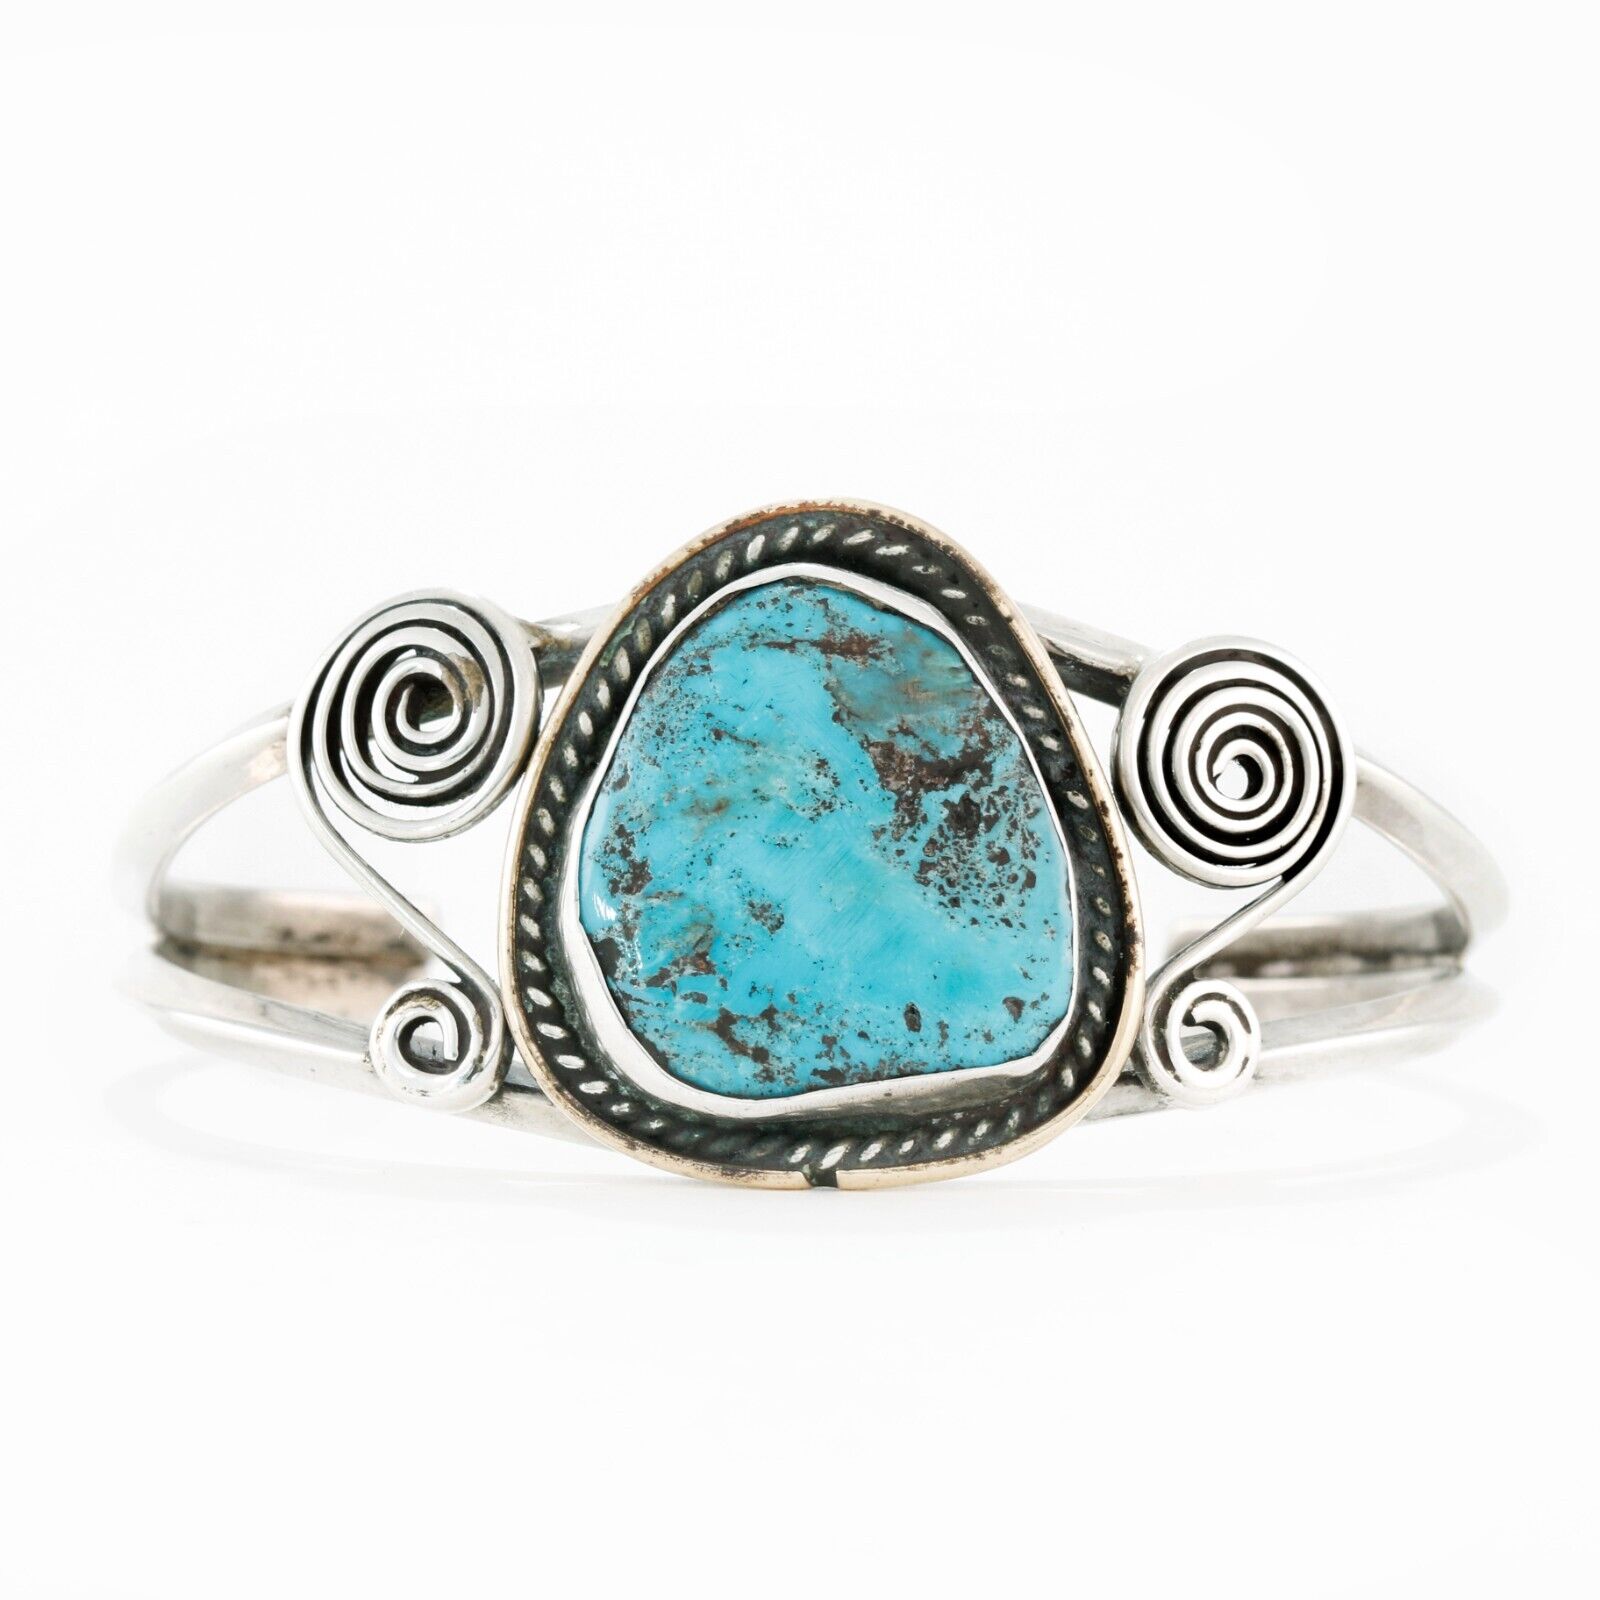 NATIVE AMERICAN STERLING BISBEE? TURQUOISE GOLD FILLED WIRE CUFF BRACELET 6.25\